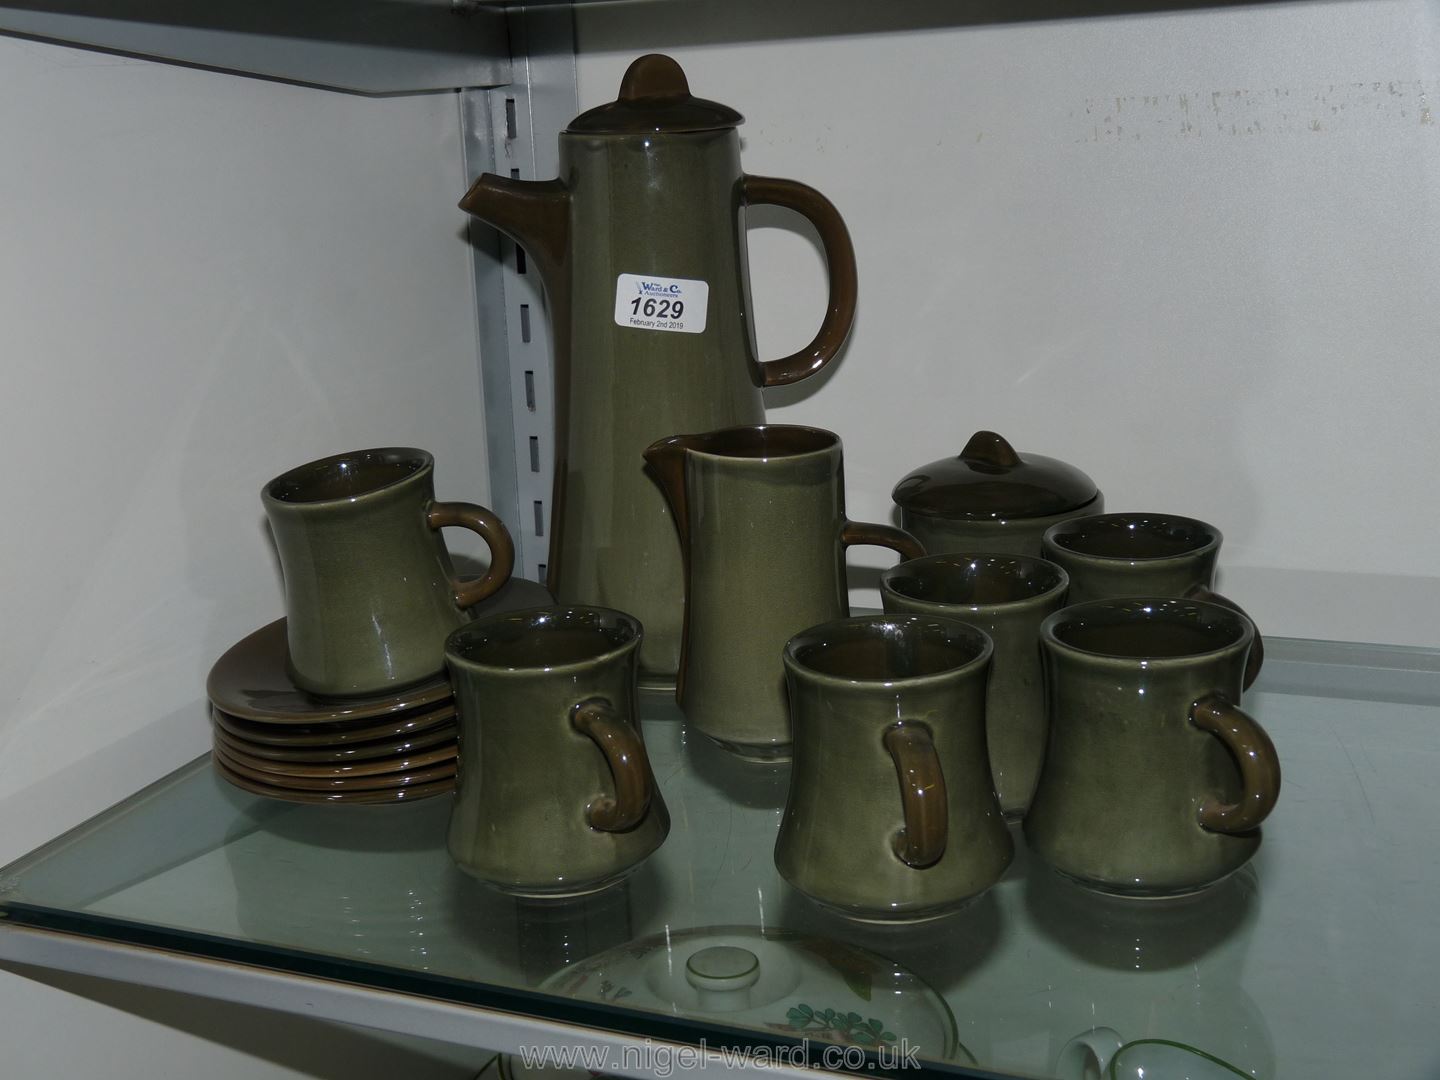 A Cornwall green pottery Coffee set comprising six mugs and saucers, coffee pot with lid,